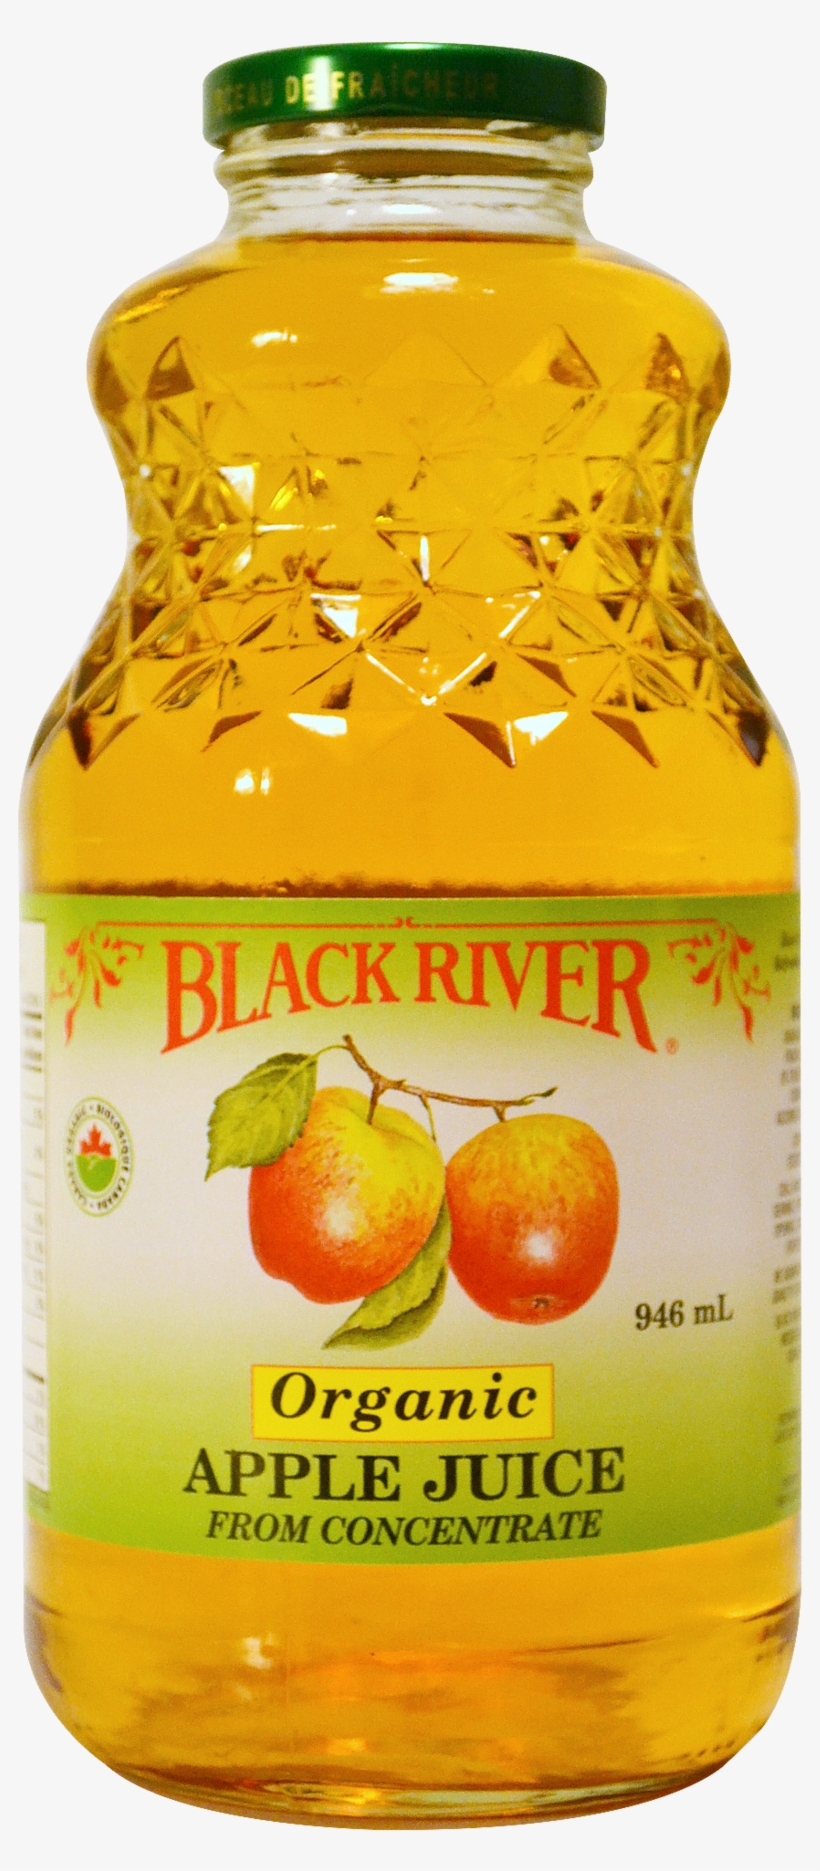 Black River Organic Apple Juice From Concentrate, transparent png #4855585